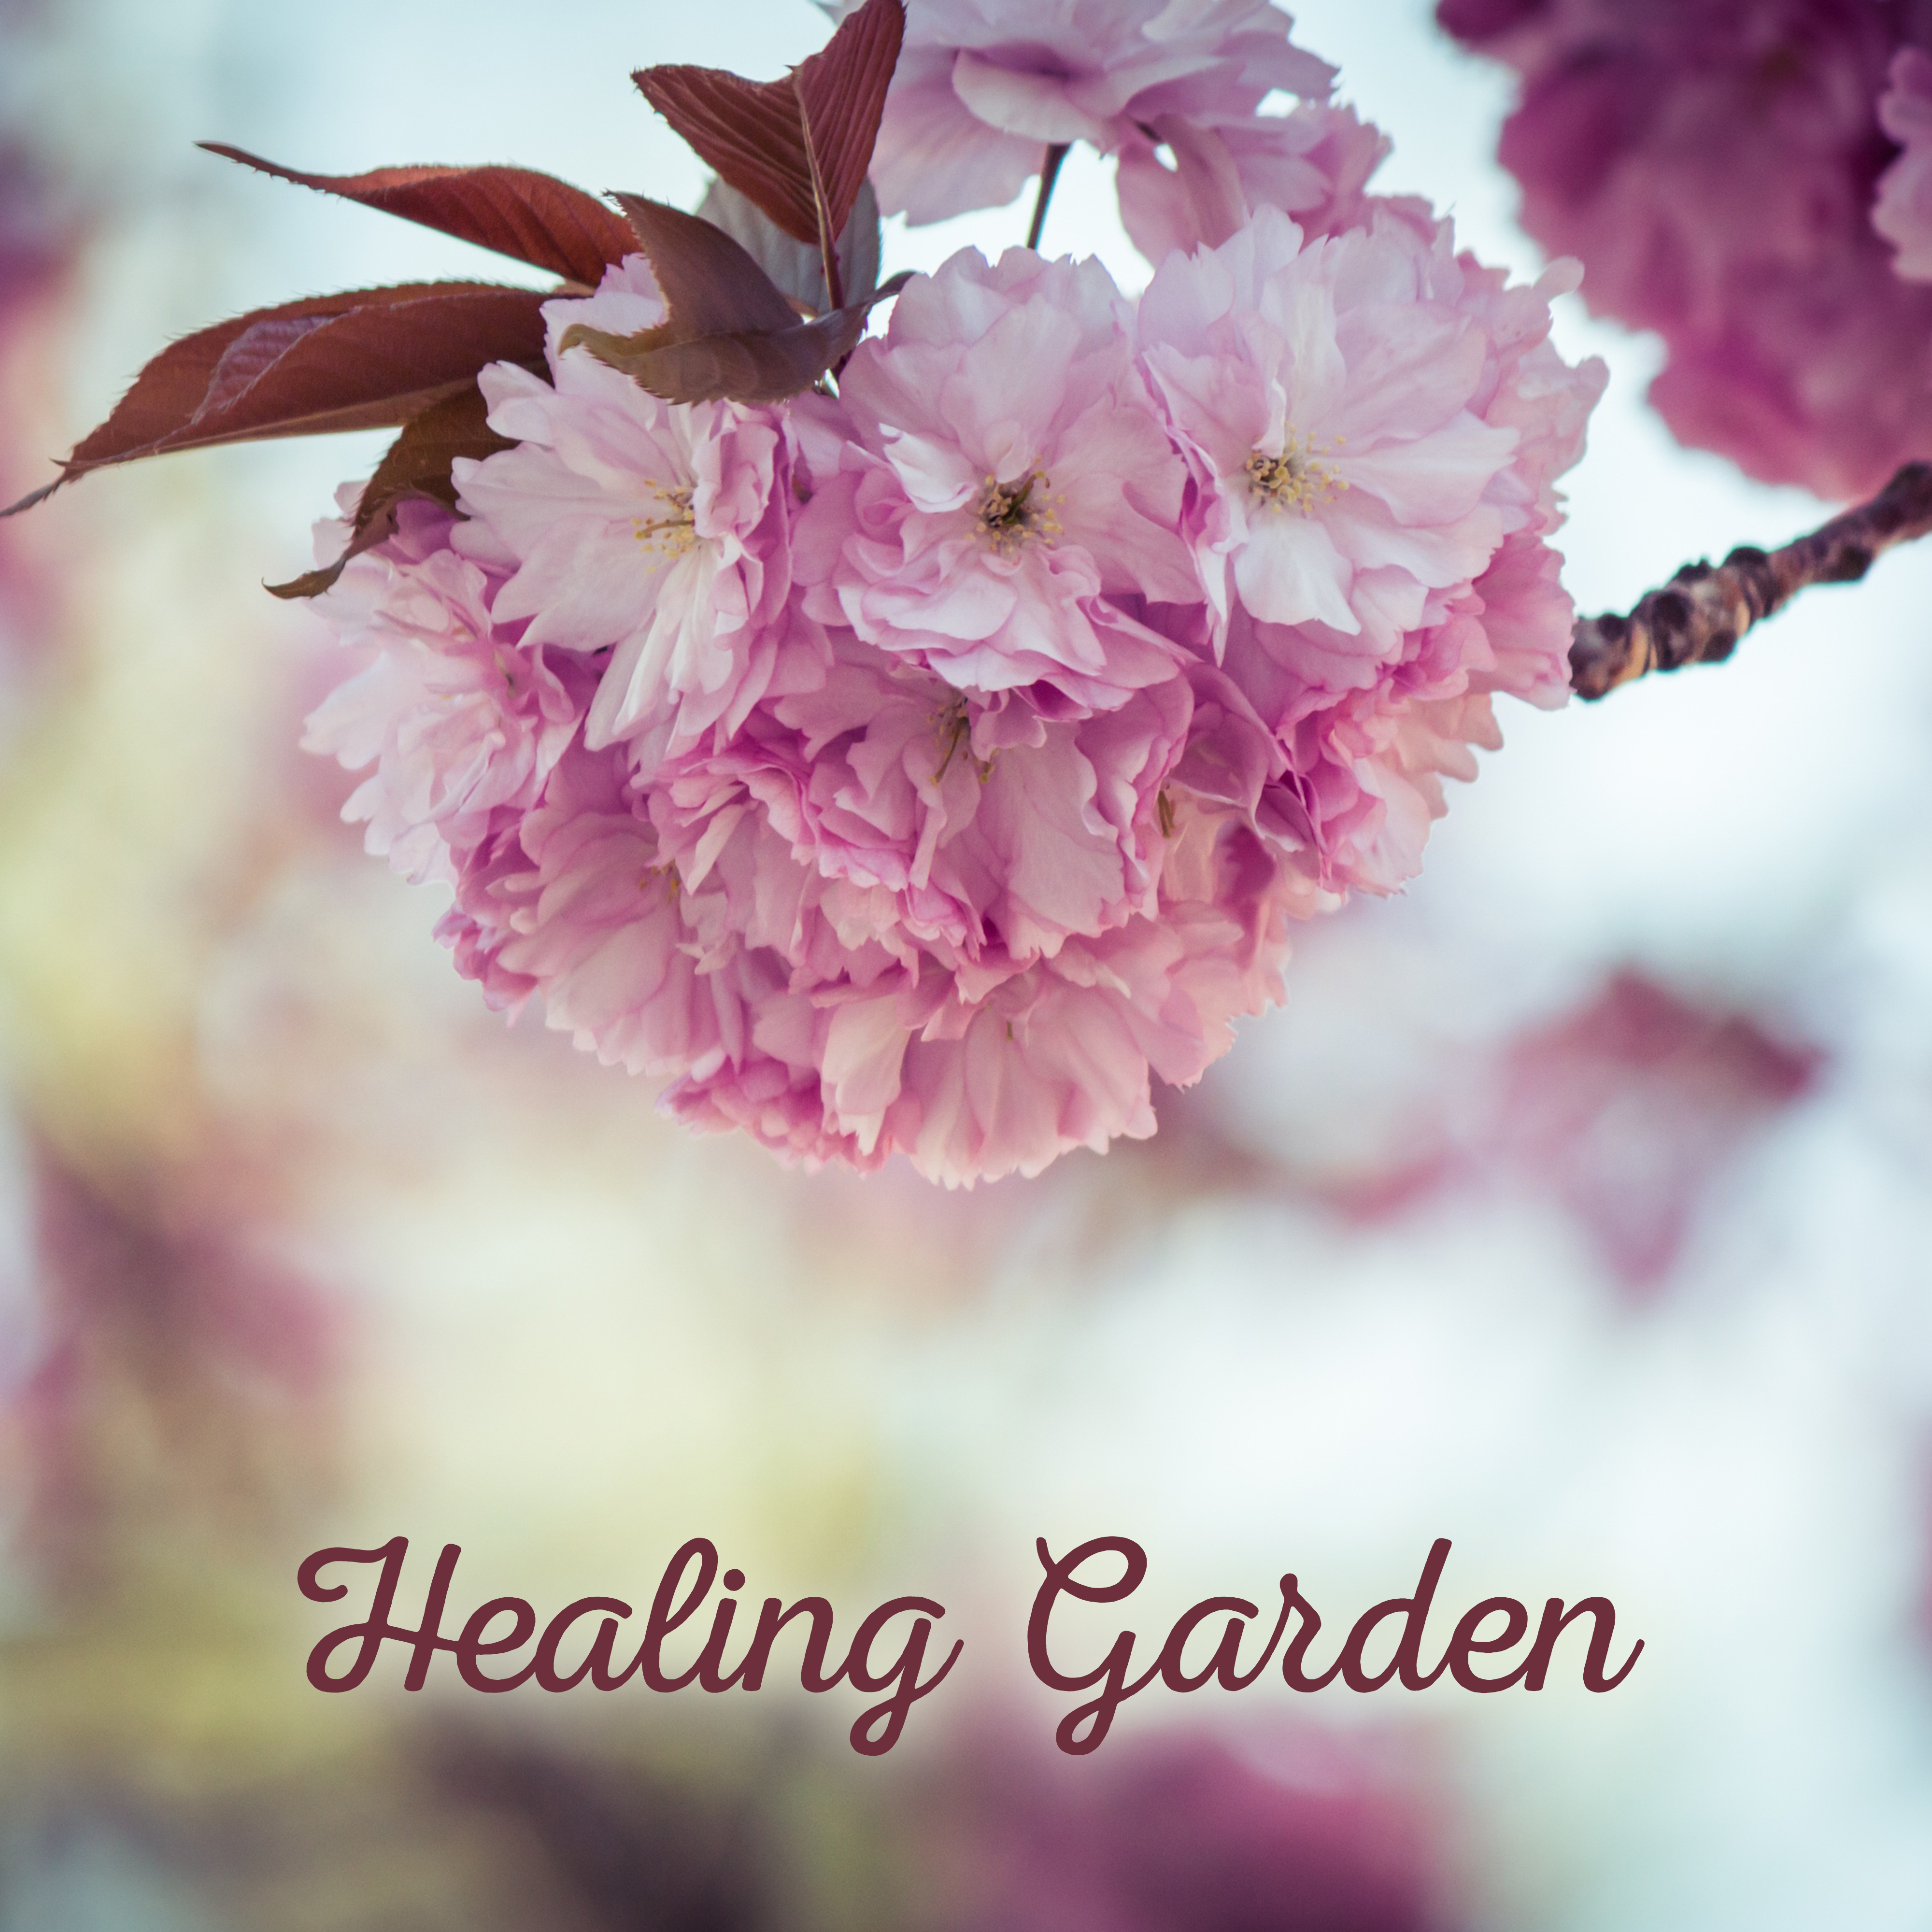 Healing Garden – Calming Relaxation Music for Massage, Rest, Peaceful New Age Sounds, Full of Nature, Falling Water, Birds Songs